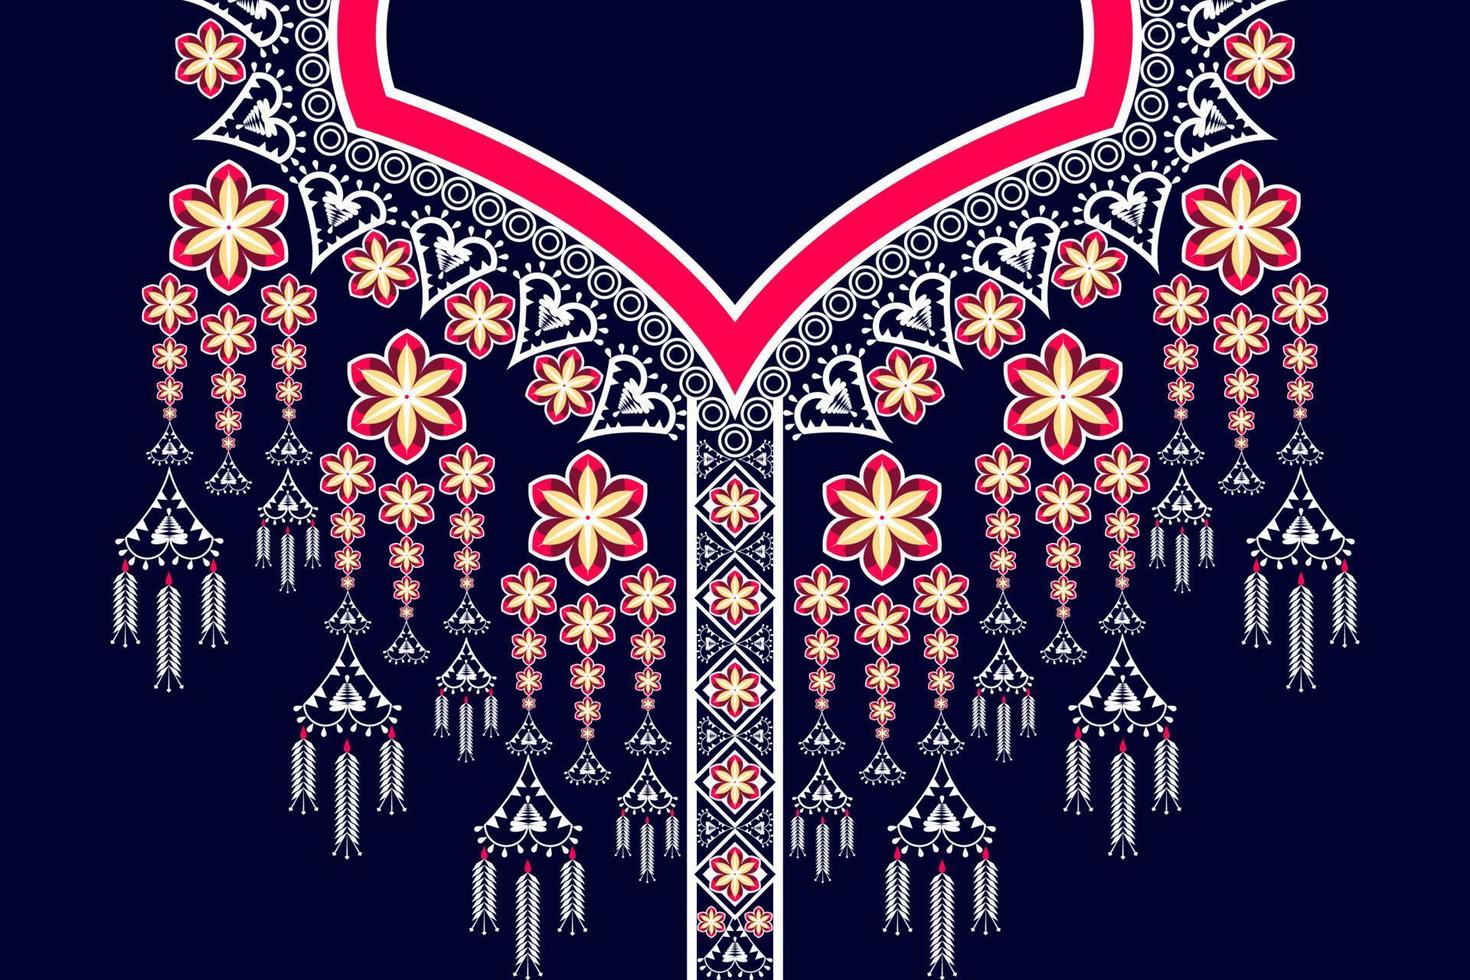 Geometric oriental pattern ethnic traditional flower necklace embroidery designs for women fashion backgrounds, wallpapers, clothes and wraps. vector